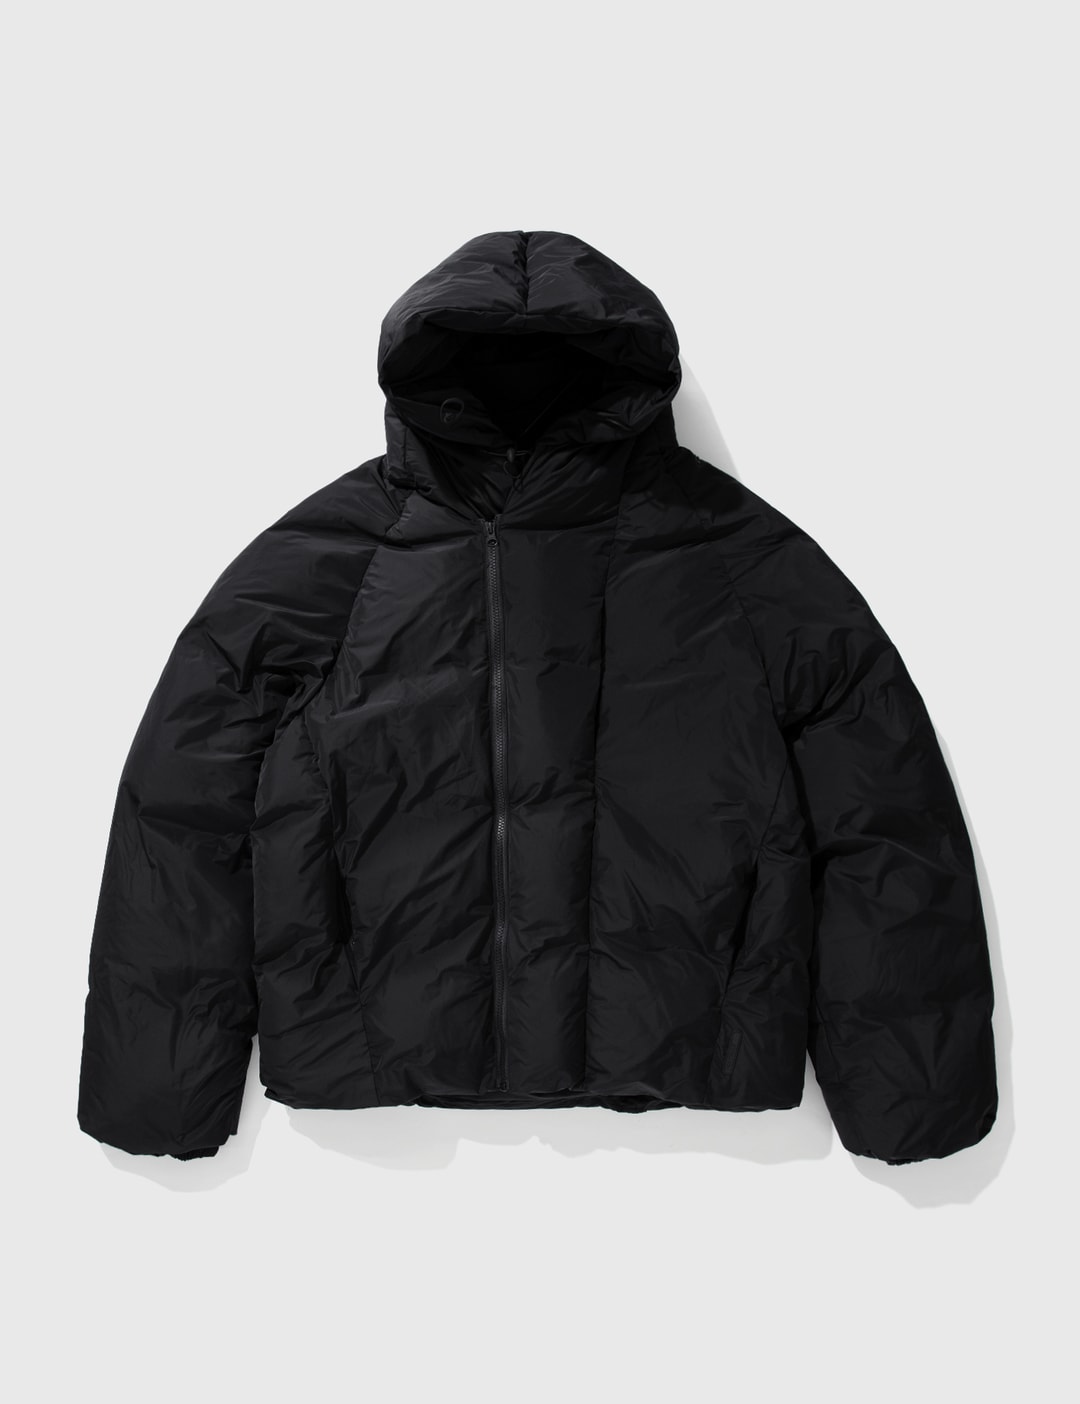 Hyein Seo - Puffer Jacket | HBX - Globally Curated Fashion and ...